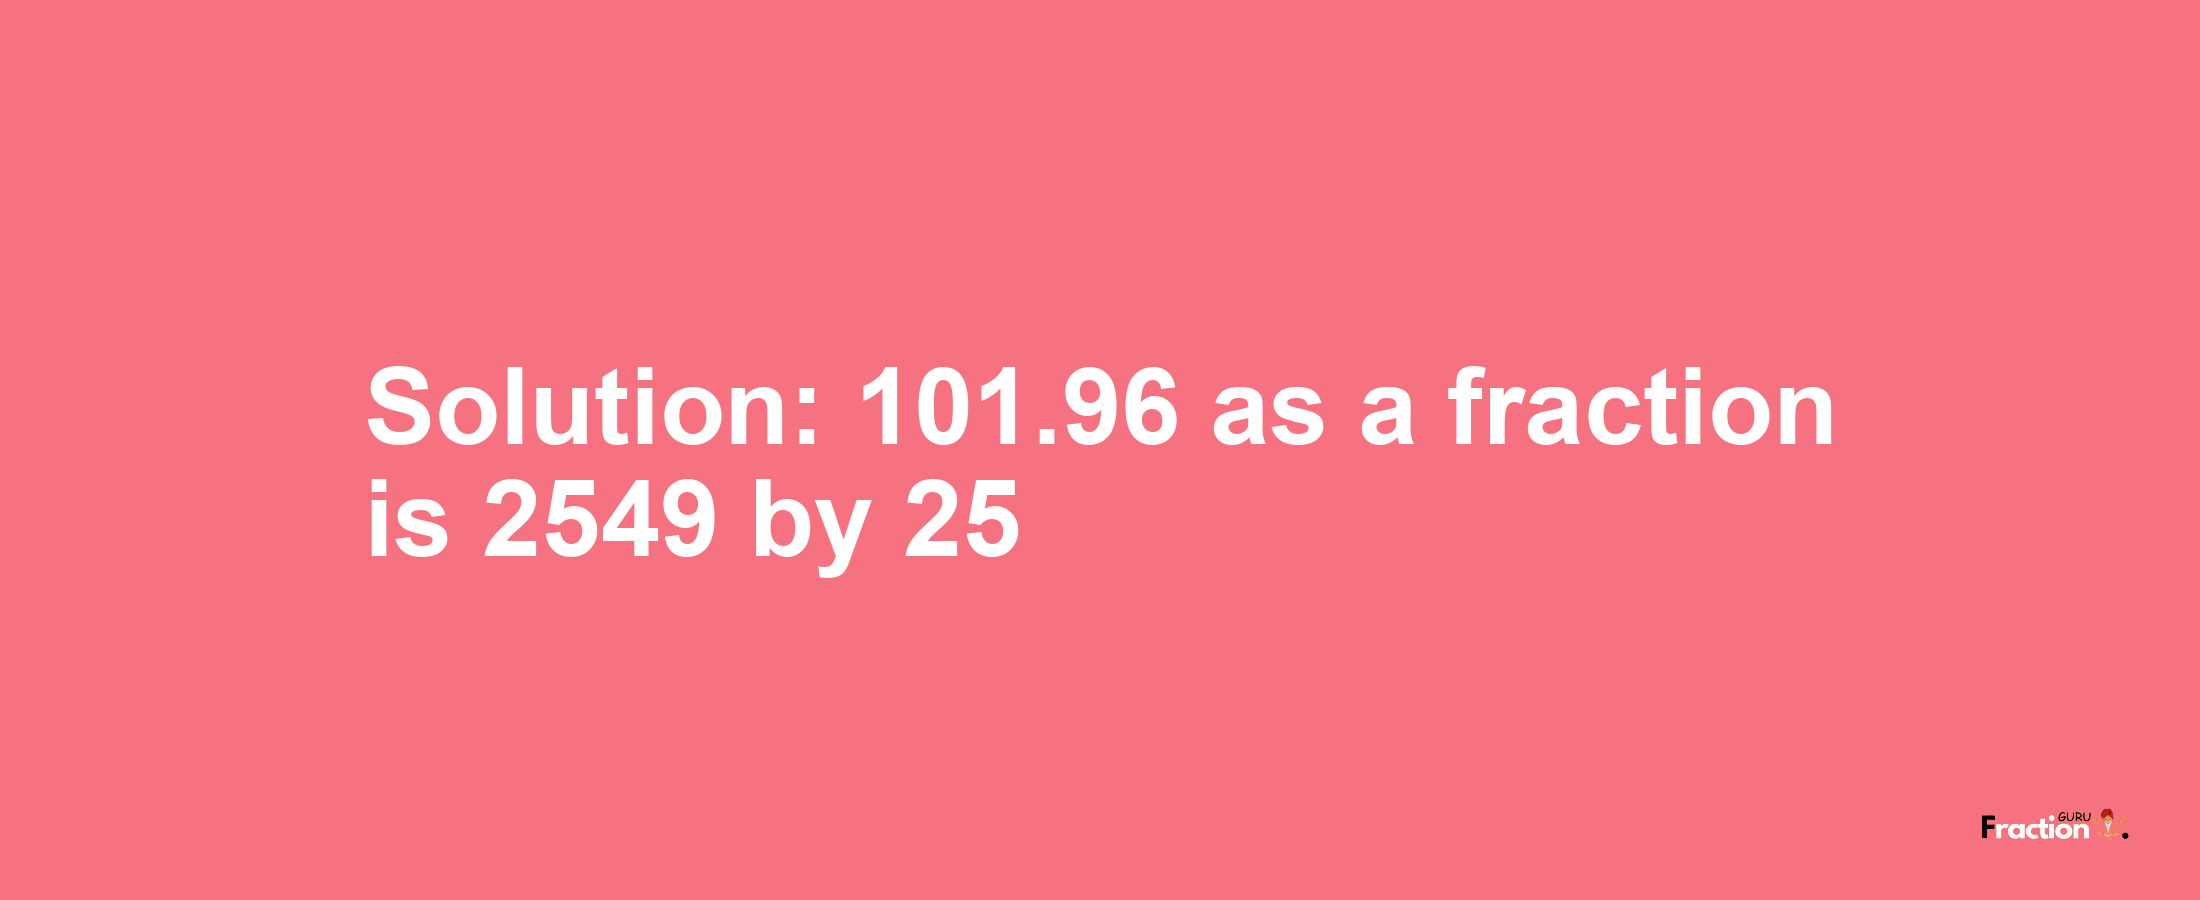 Solution:101.96 as a fraction is 2549/25